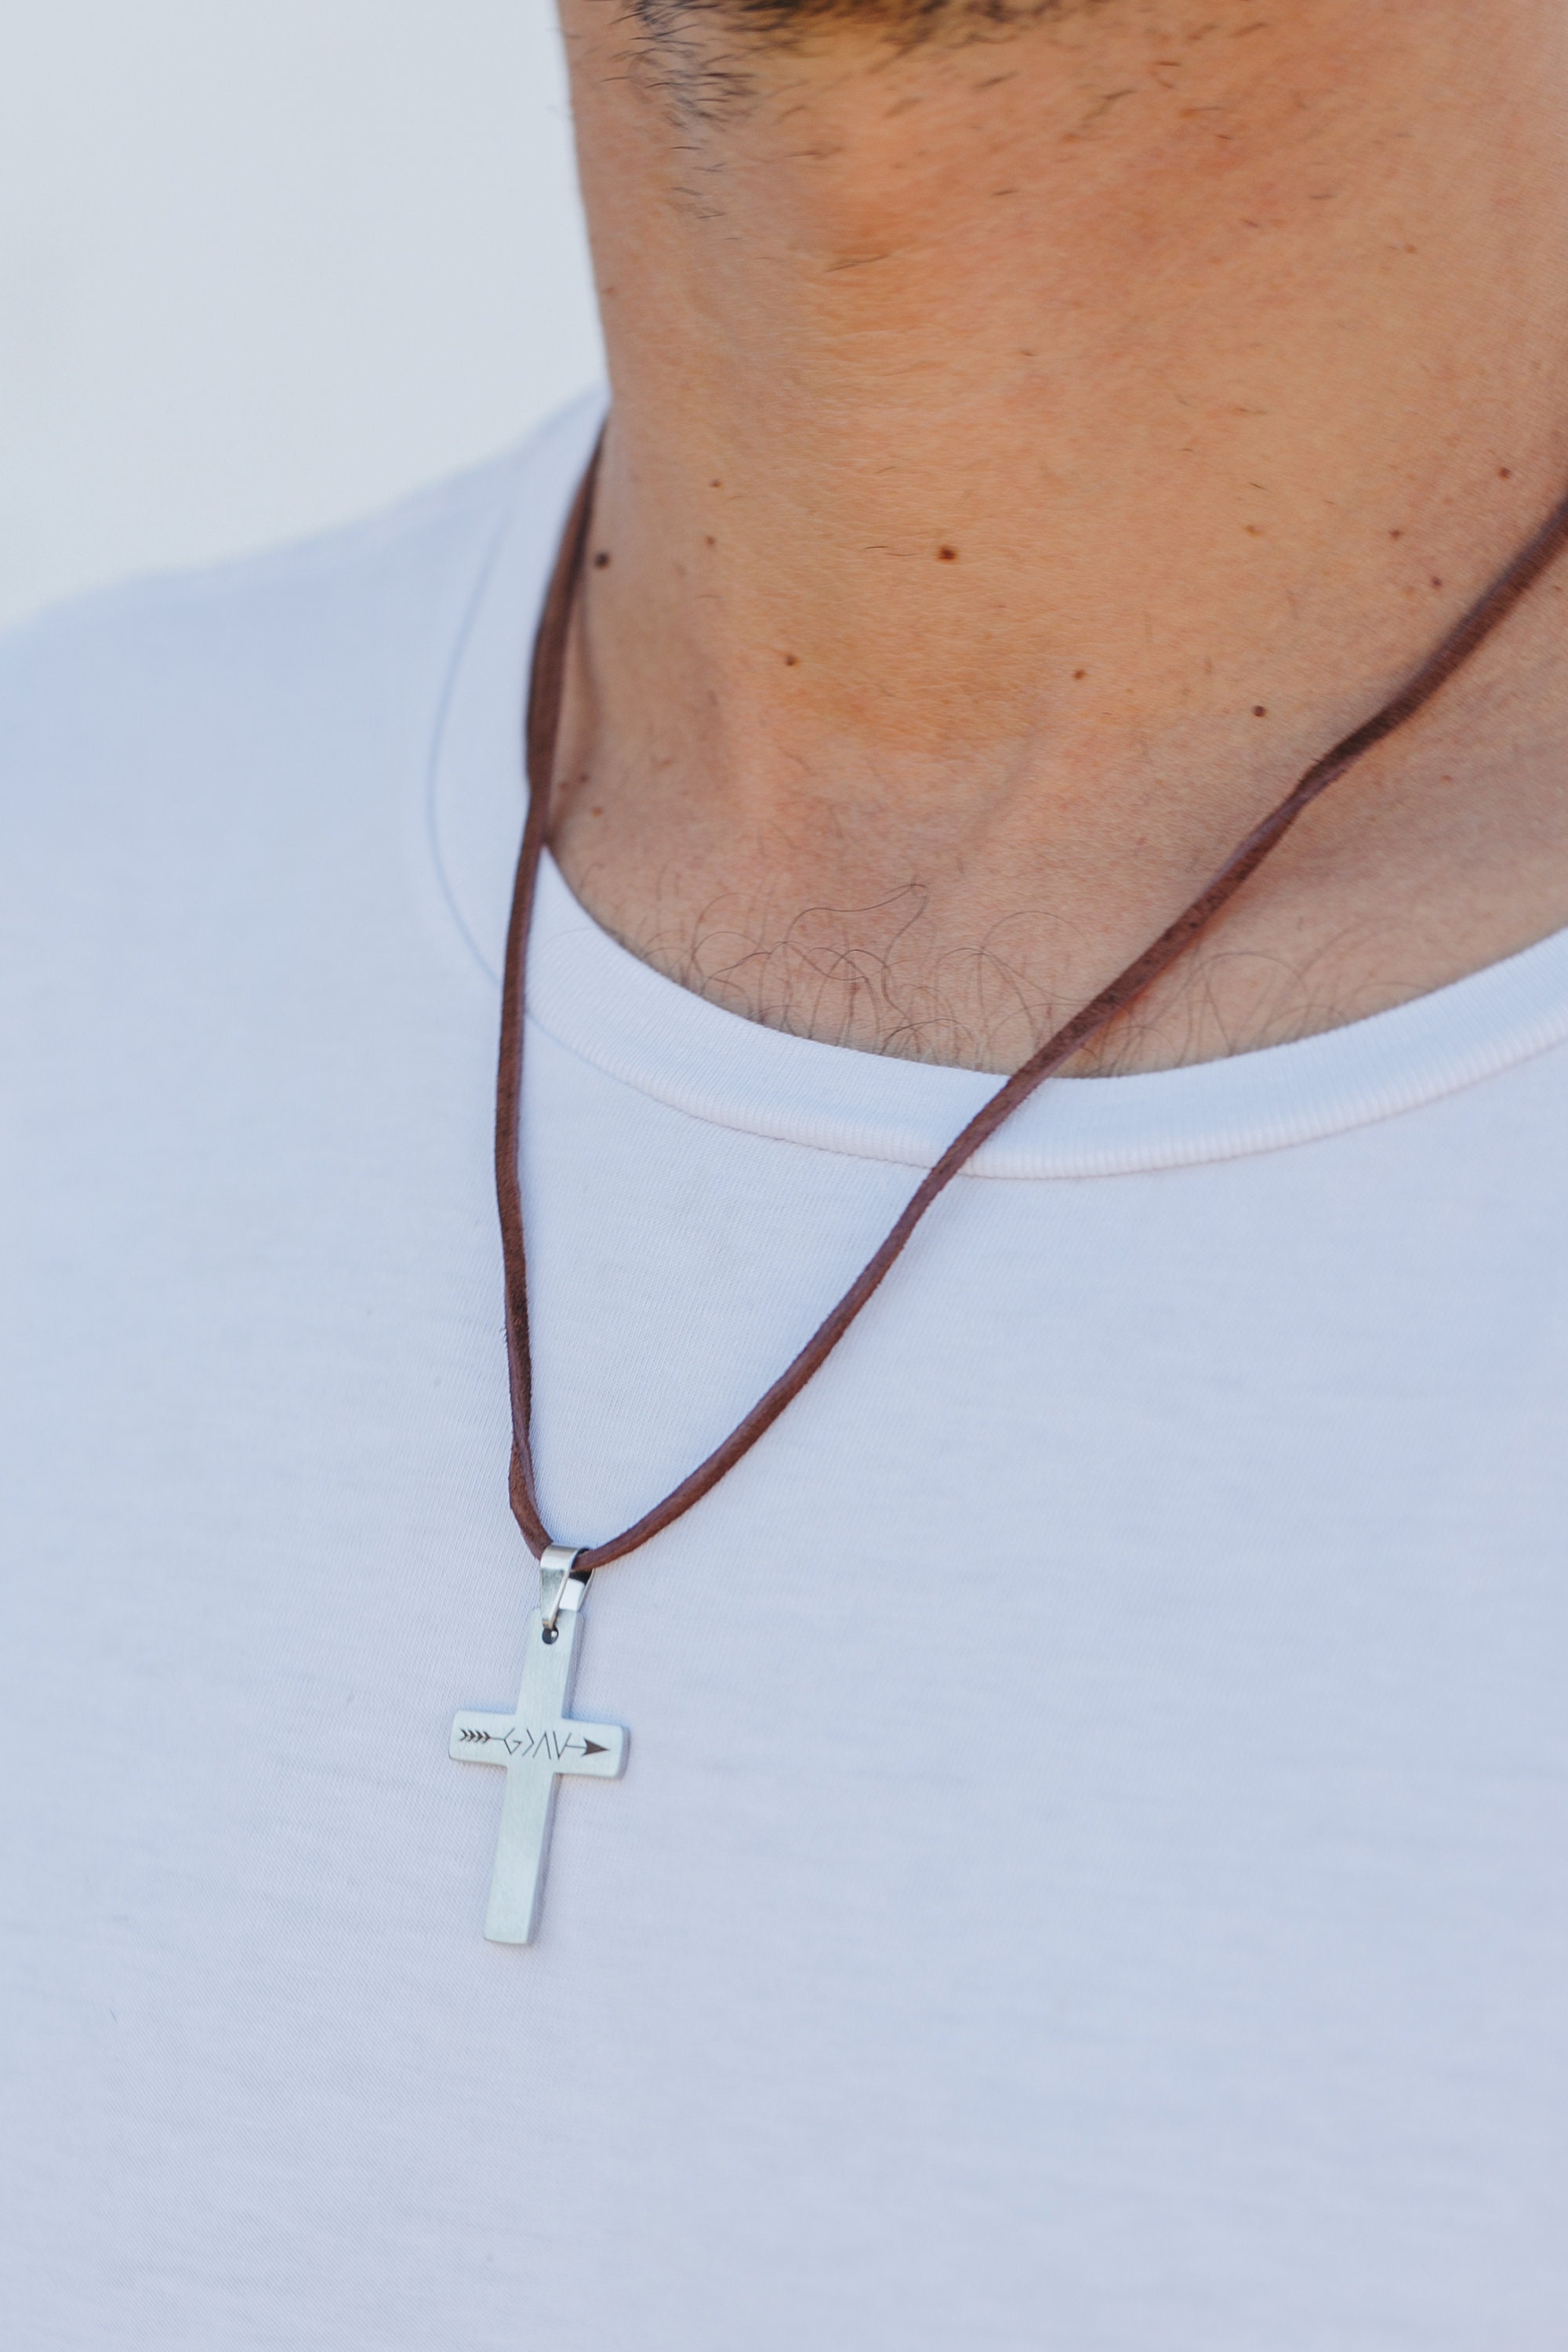 Mens black cross necklace, beaded,leather,surfer,hand made stainless Steel  cross | eBay